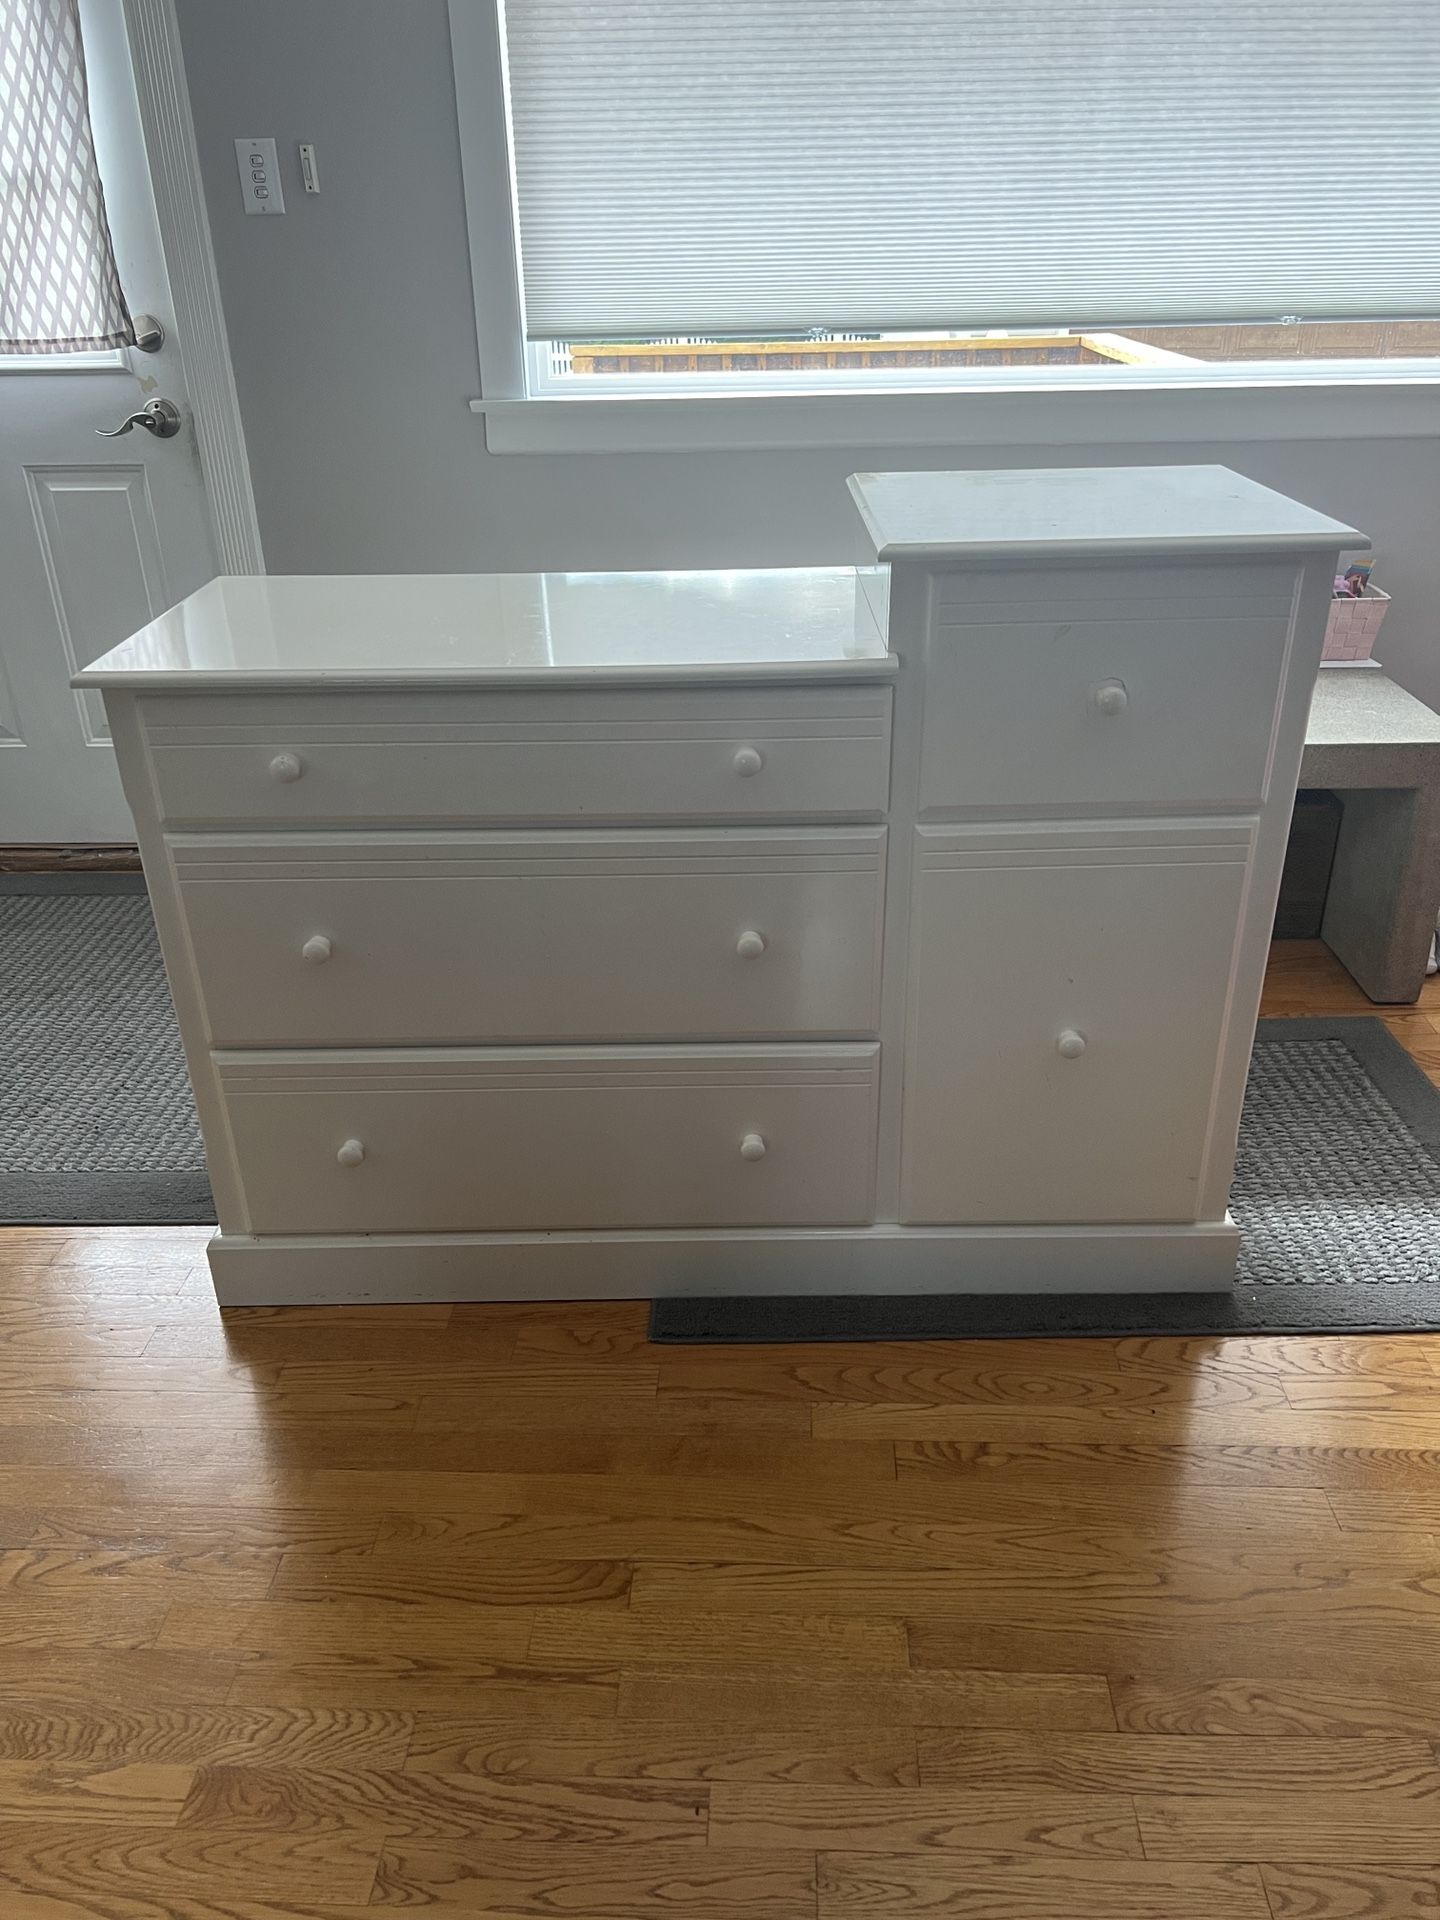 Baby Changing Table and Dresser